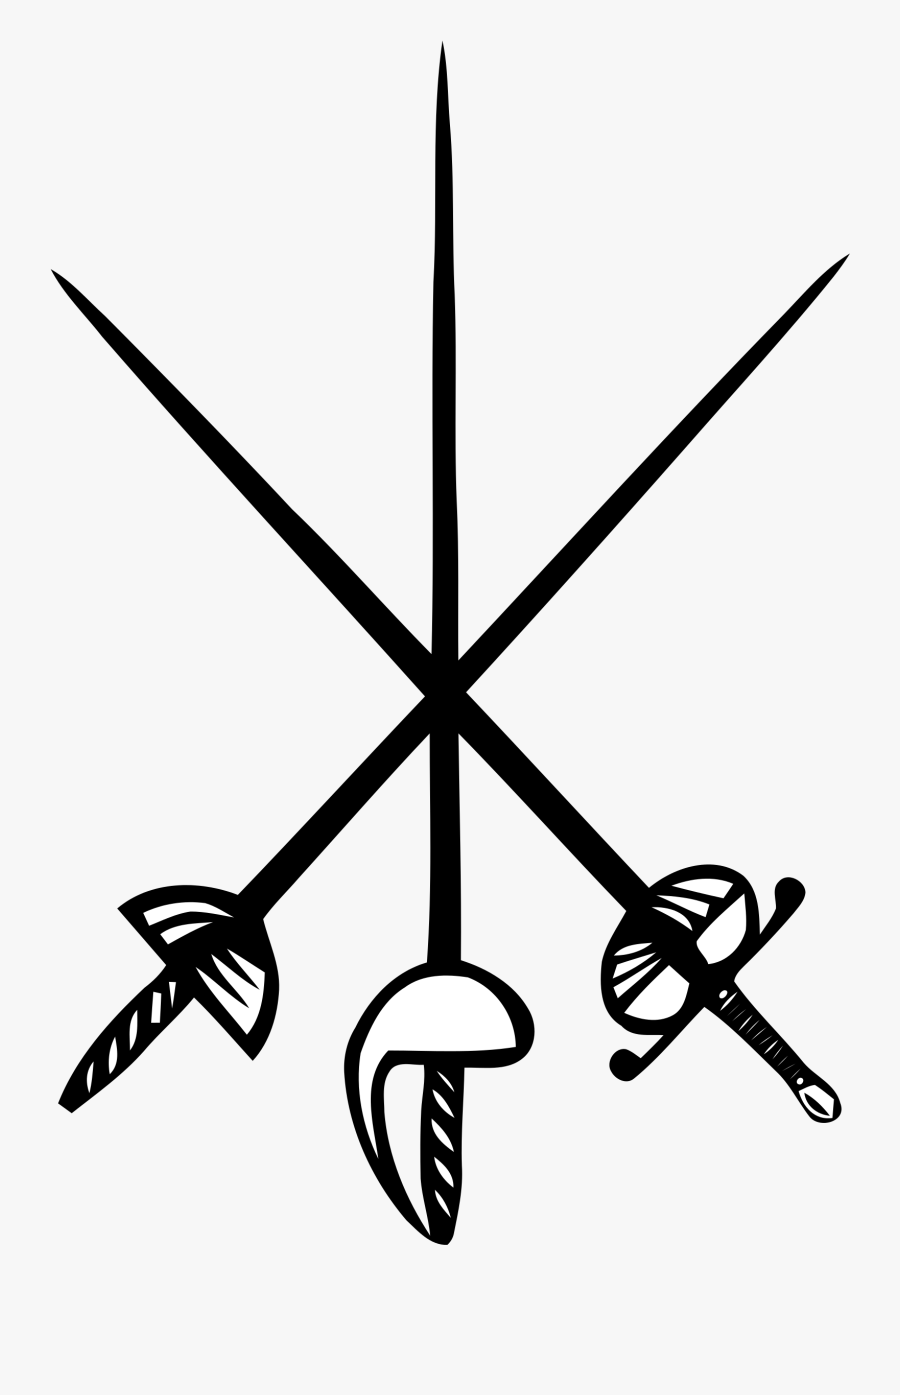 Fencing For Youth - Fencing Sword Fencing Clipart, Transparent Clipart